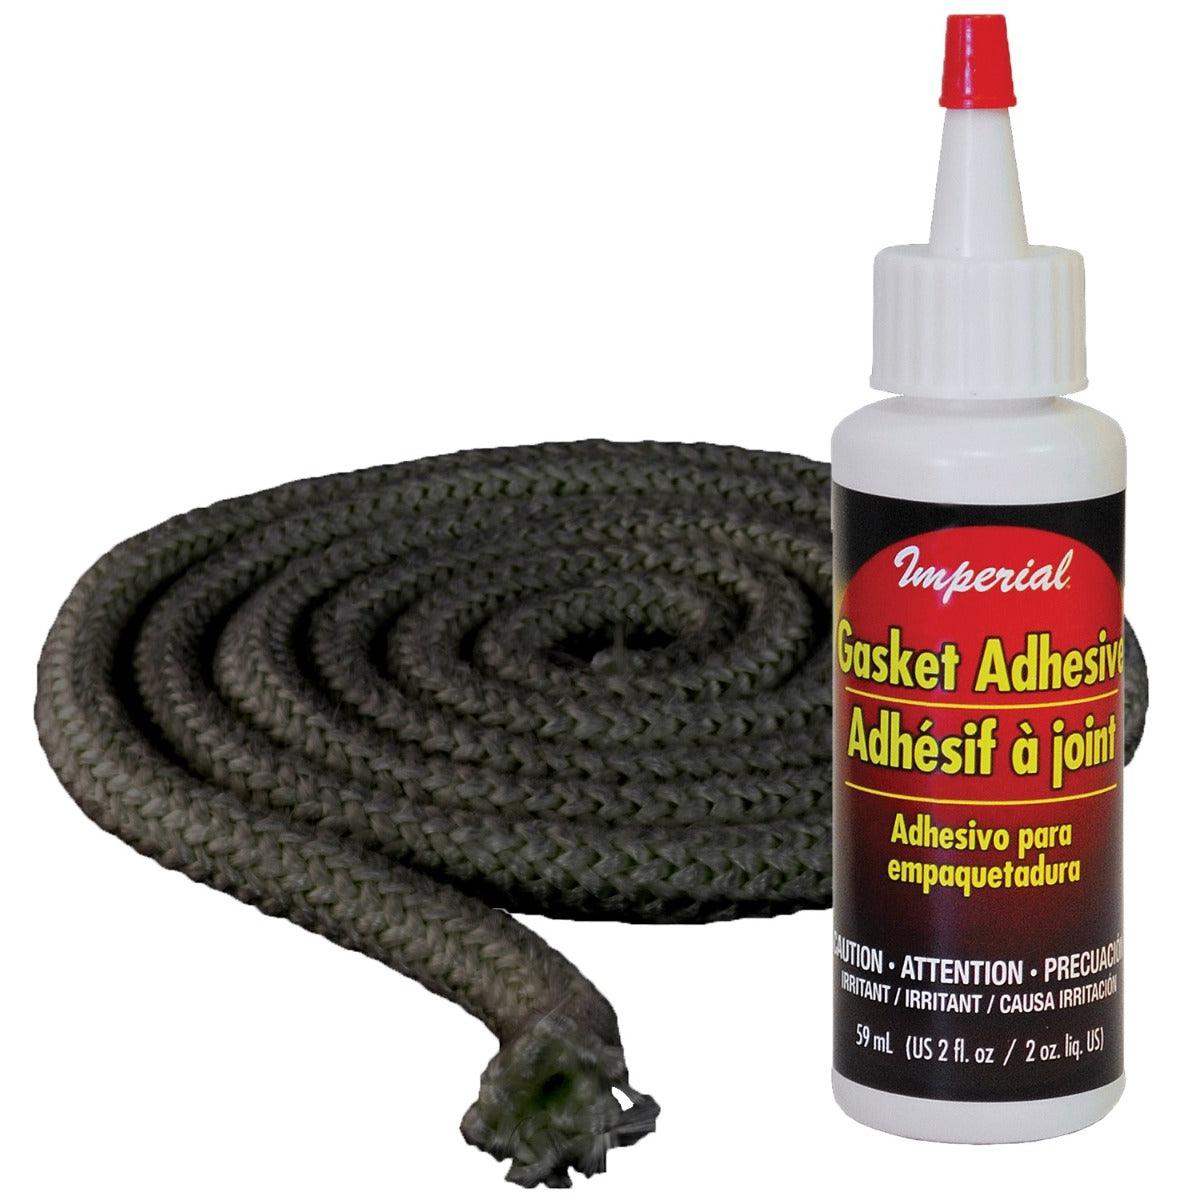 Avalon Door Rope Gasket Kit 7/8in x 10ft - Woodstove Fireplace Glass